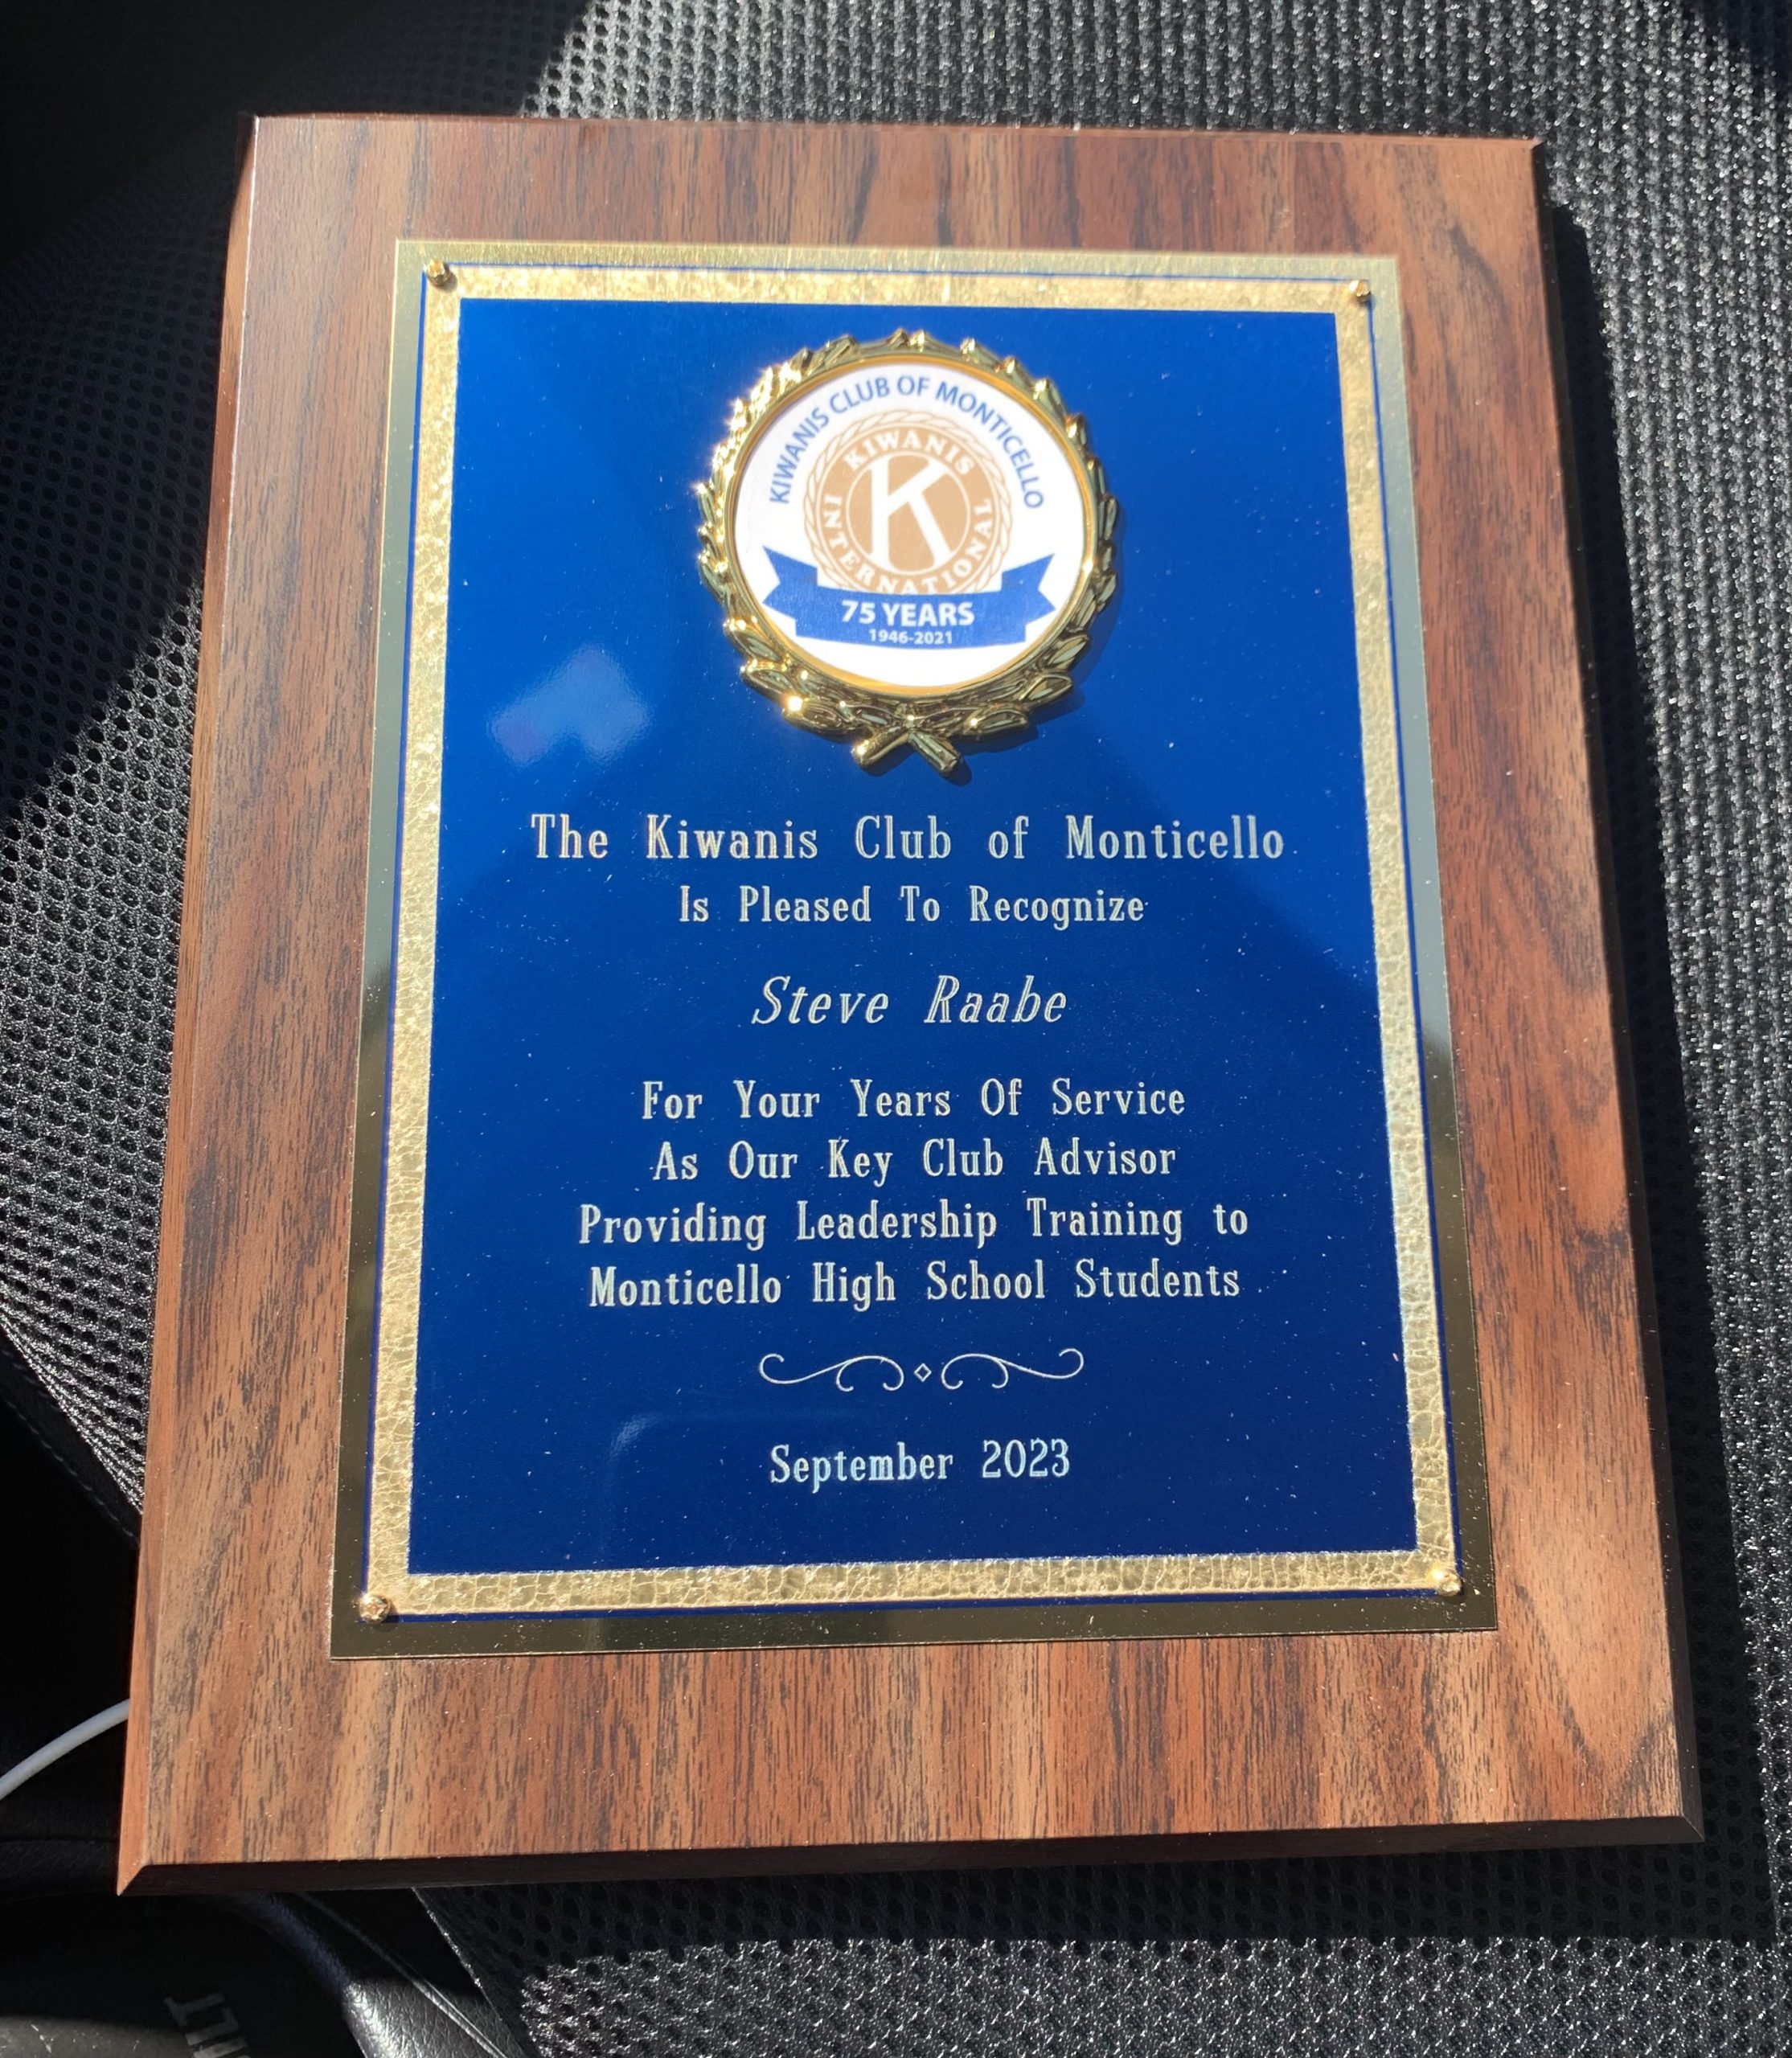 Photo is of the plaque presented to Steven Raabe